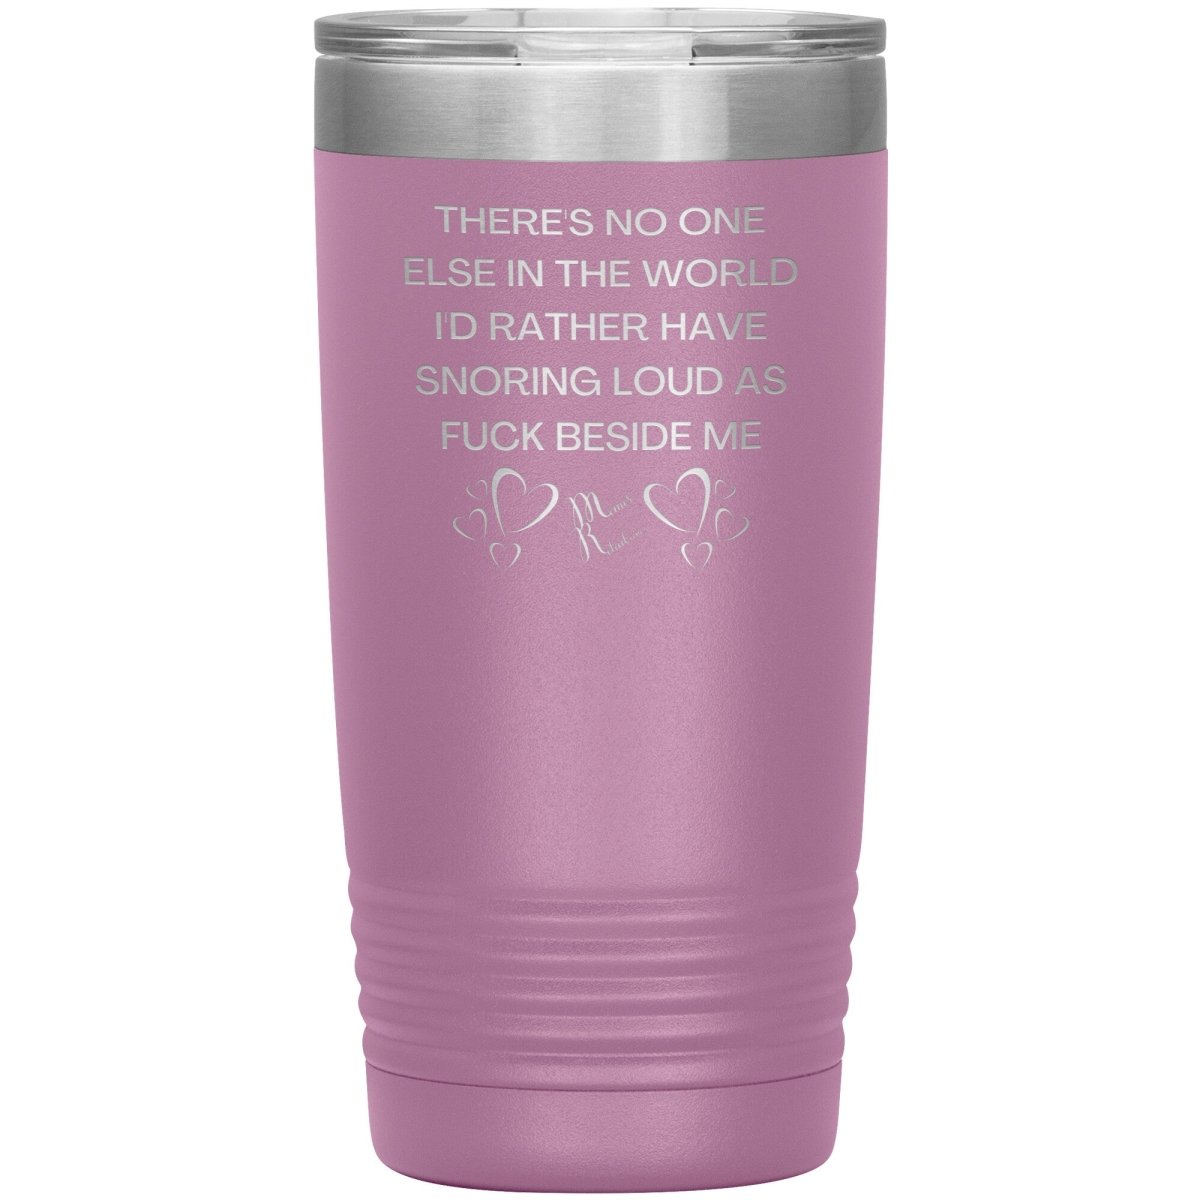 There's No One Else in the World I'd Rather Have Snoring Loud, 20oz Insulated Tumbler / Light Purple - MemesRetail.com